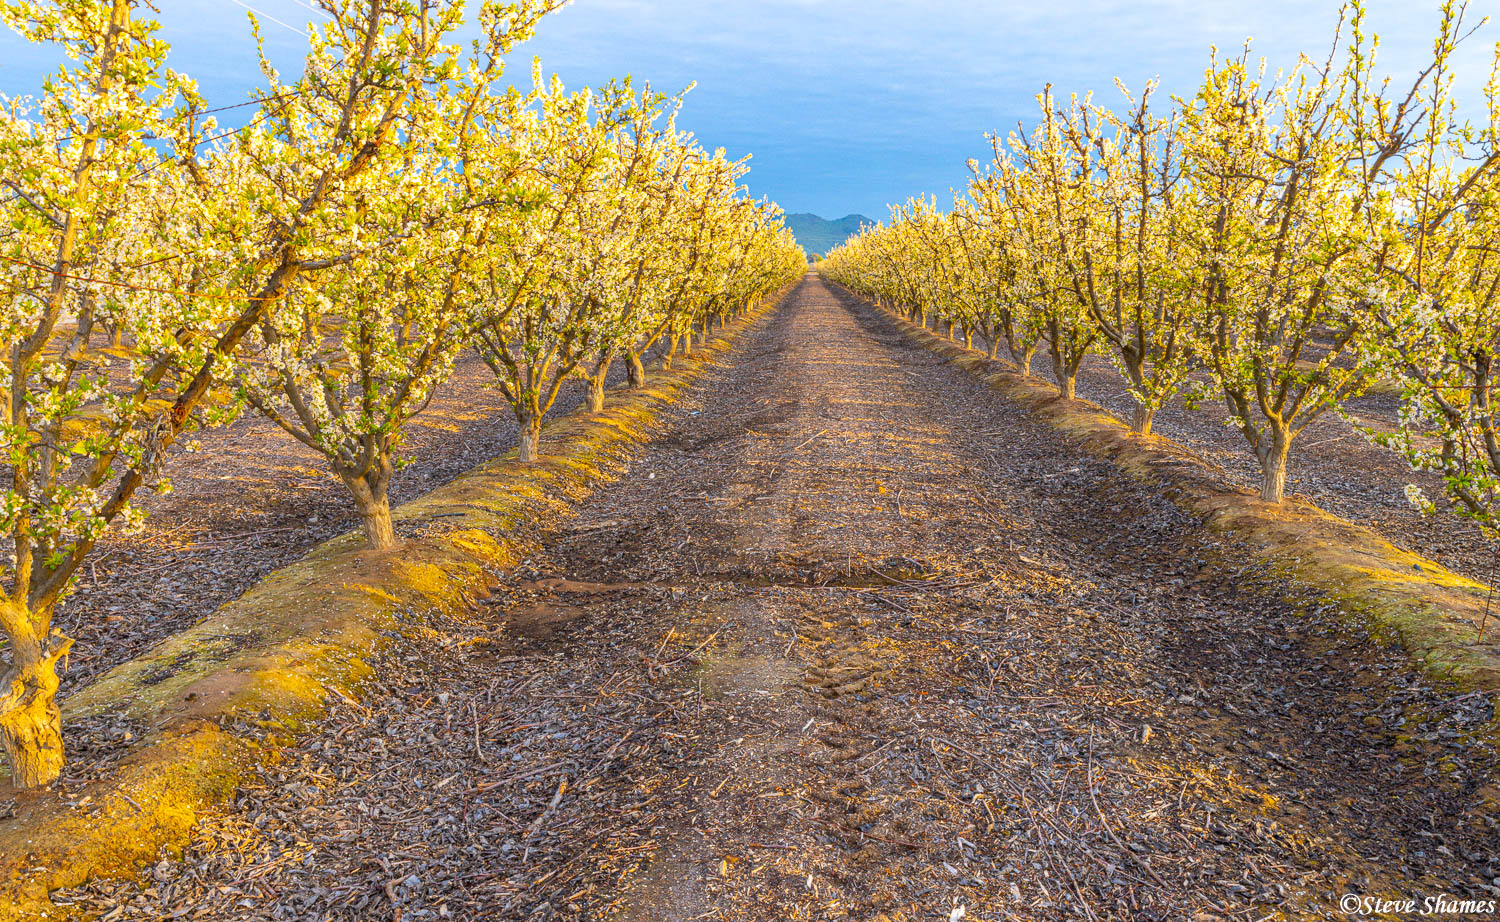 Fresno County orchard just after sunrise.